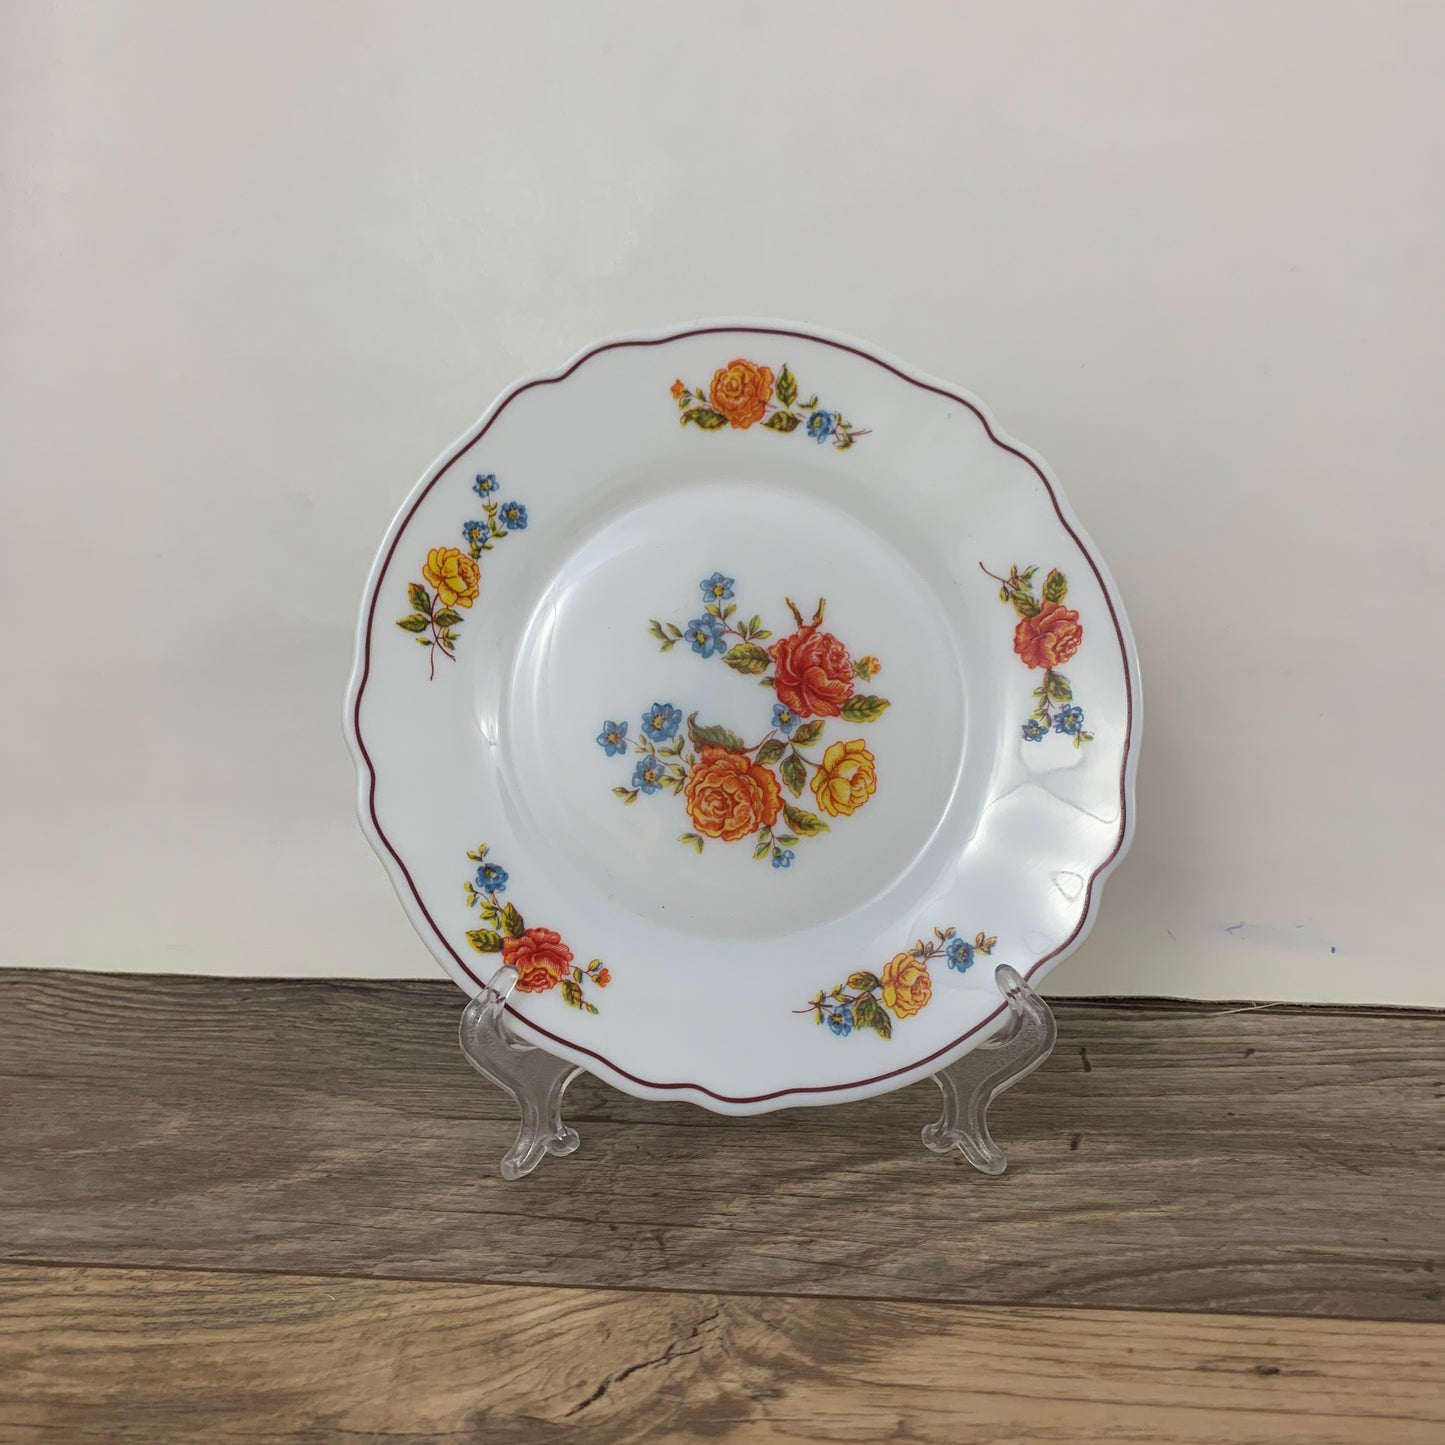 Acropal France 7.5" Salad Plate Milk Glass Plate with Orange and Blue Floral Pattern